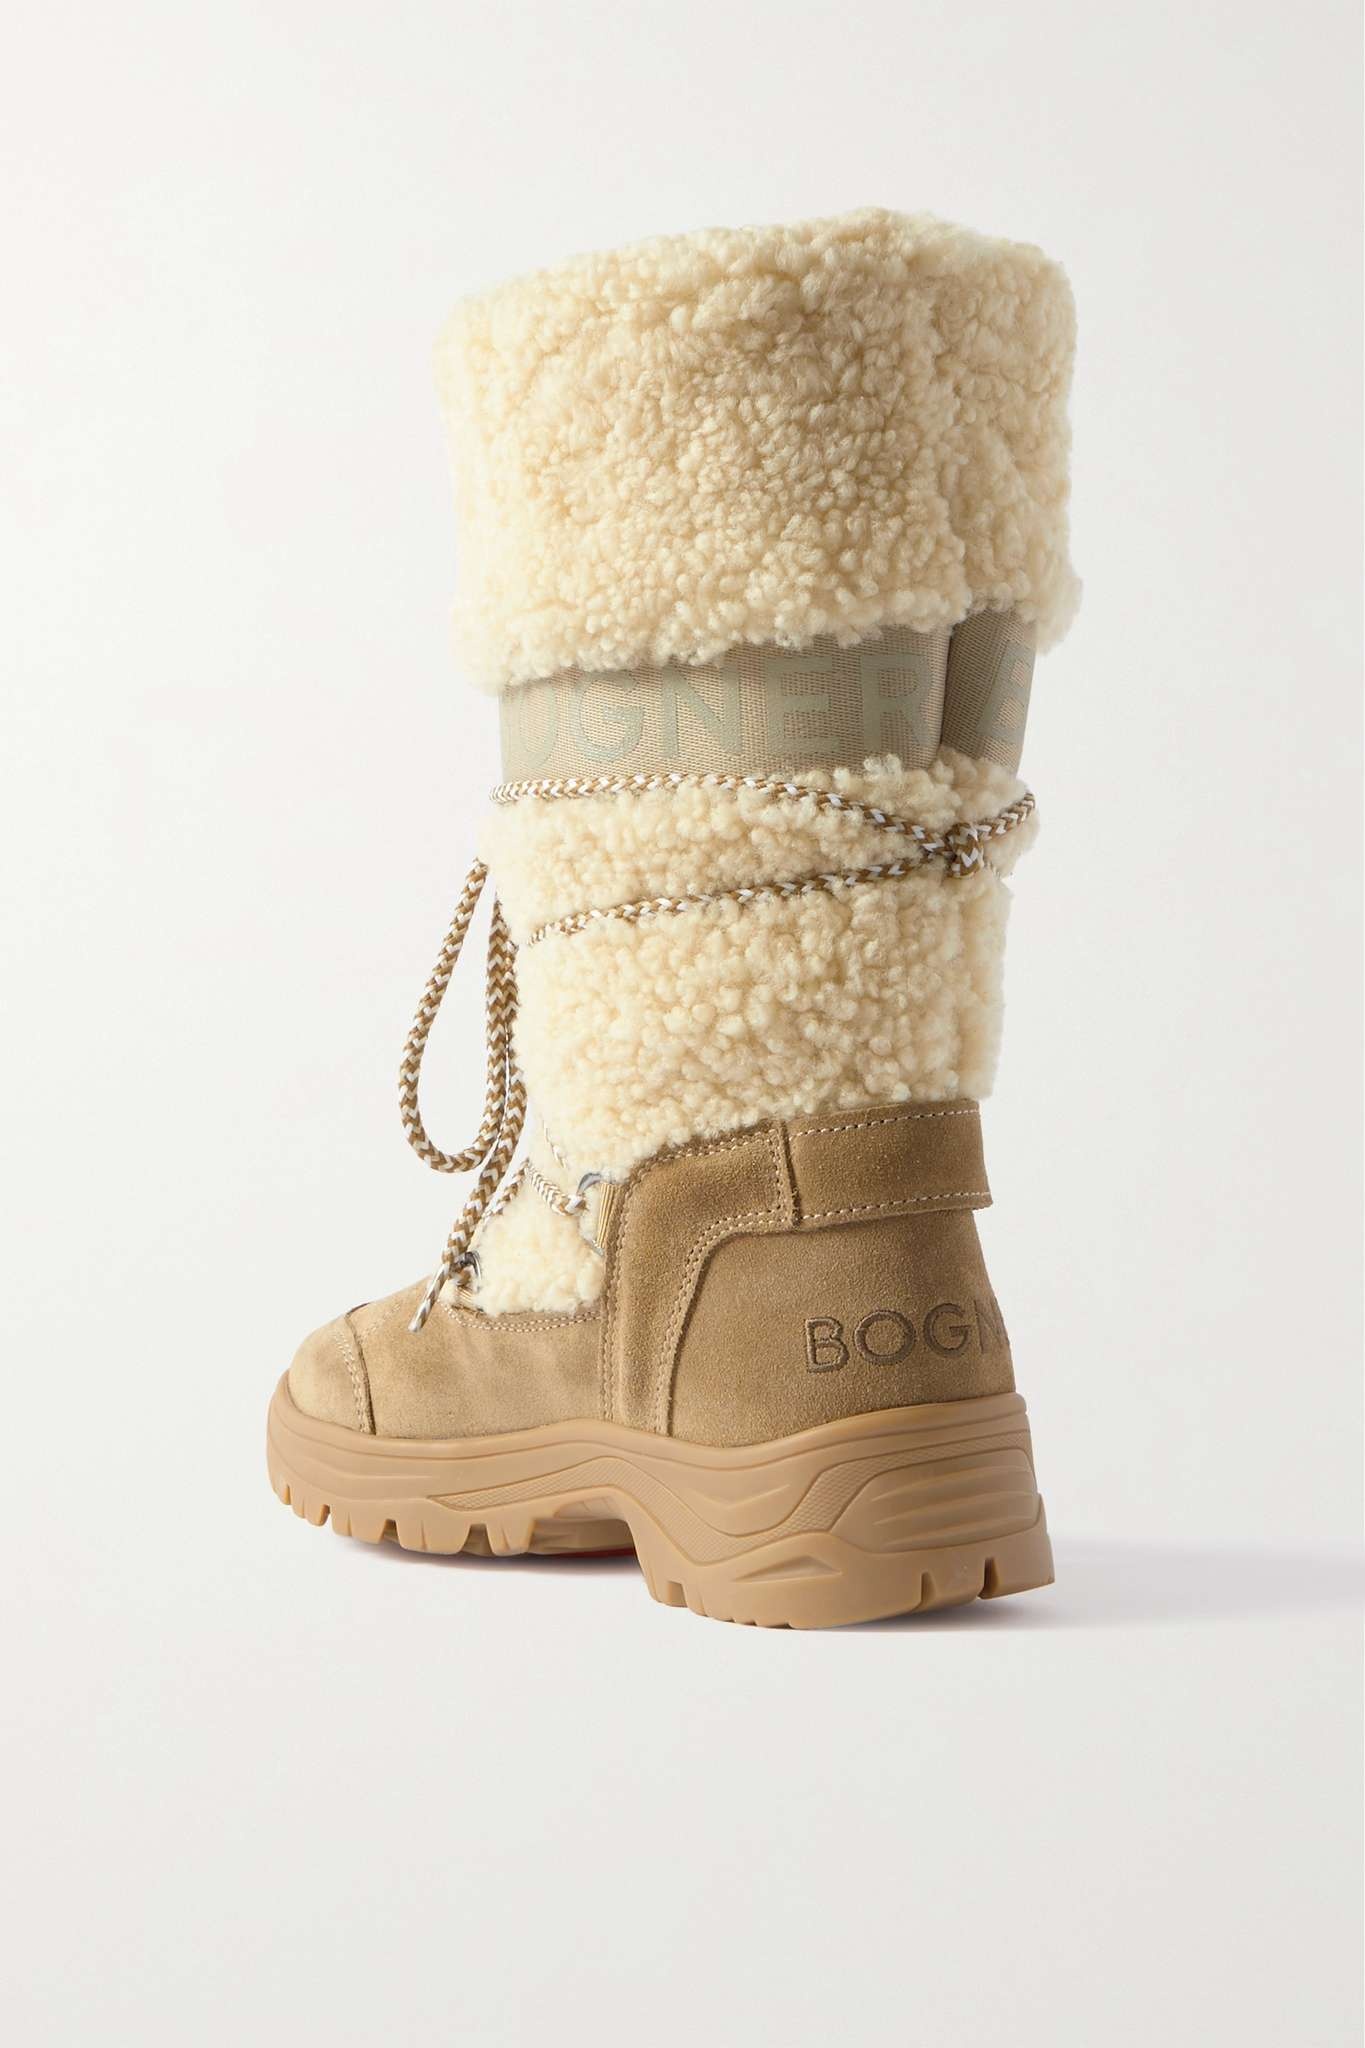 BOGNER Alta Badia 2 B shearling and suede snow boots